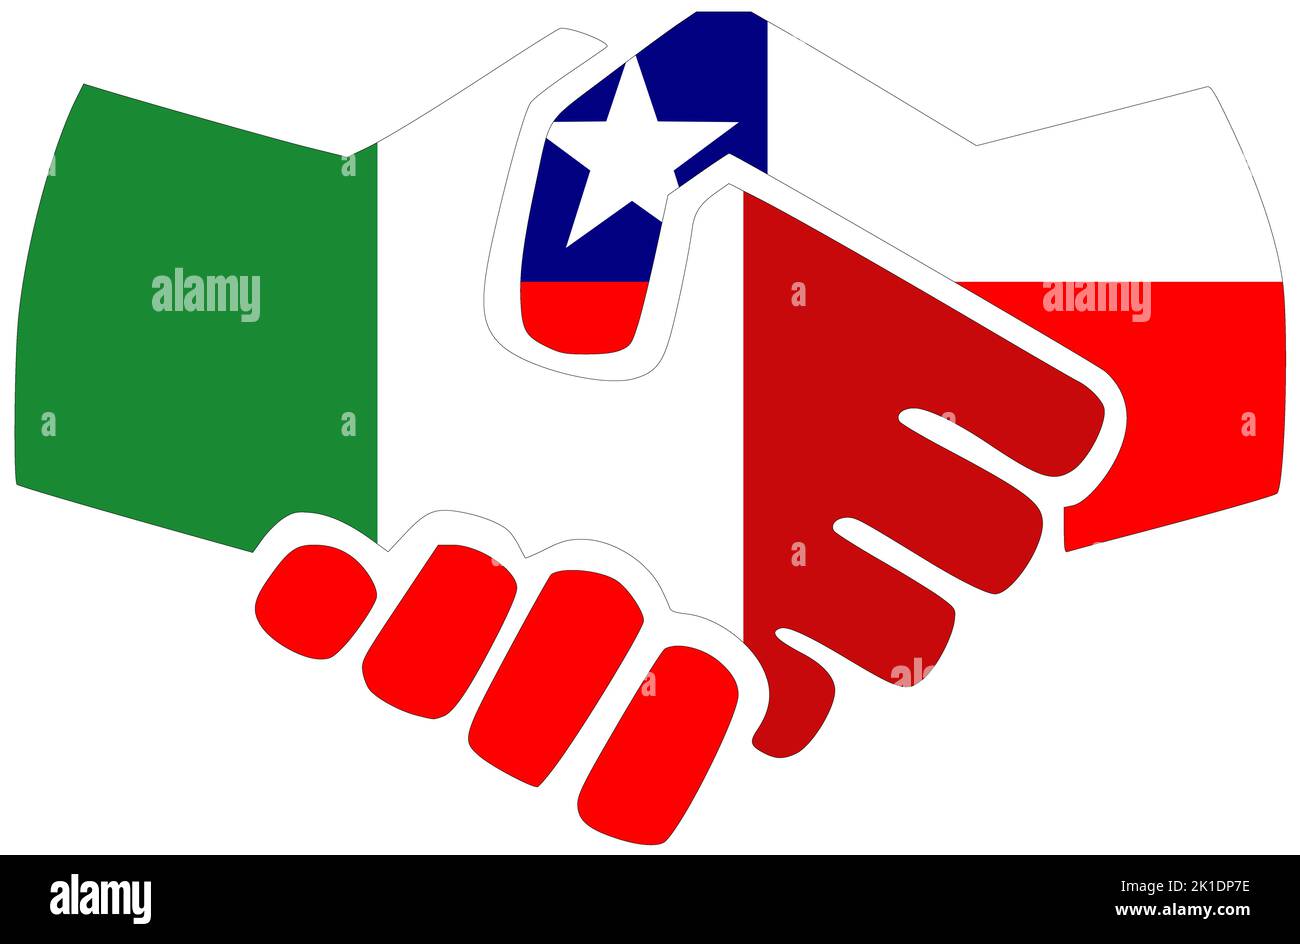 Italy - Chile : Handshake, symbol of agreement or friendship Stock Photo